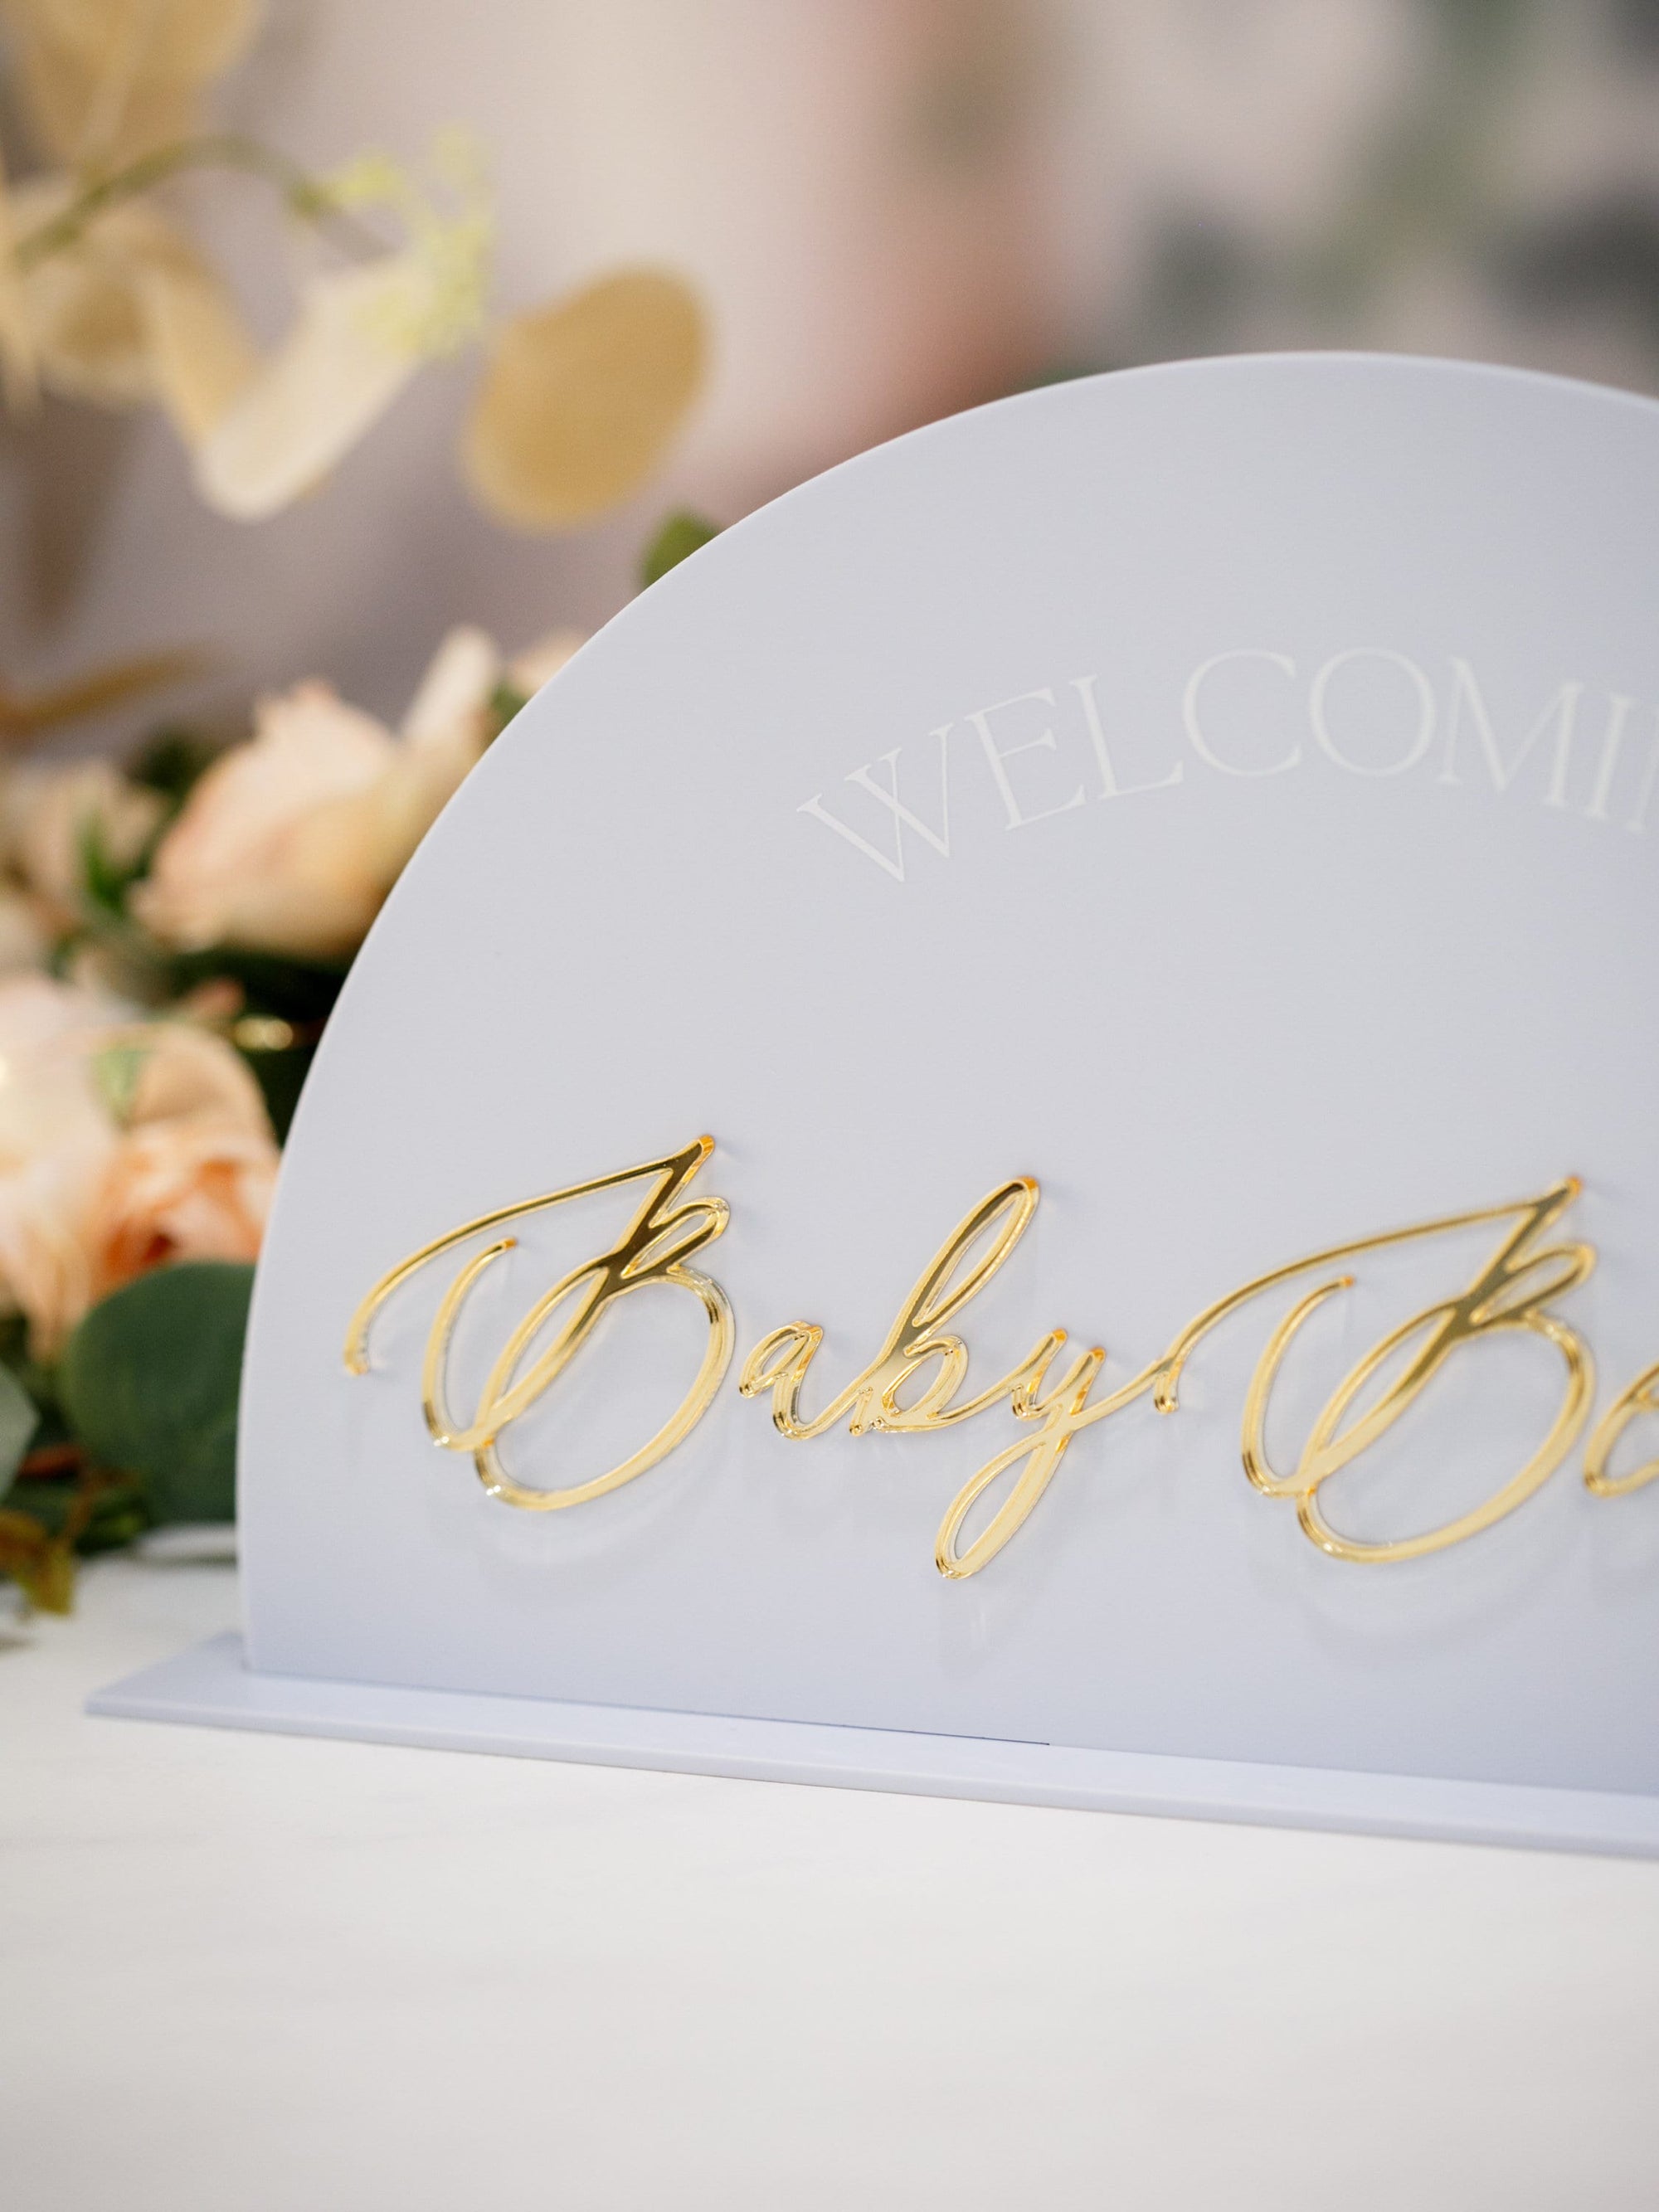 3D Mirrored Acrylic Arch Baby Shower Welcoming Baby Sign, Laser Cut Newborn Party Signage, New Boy or Girl Dusty Blue or Rose Shower Decor